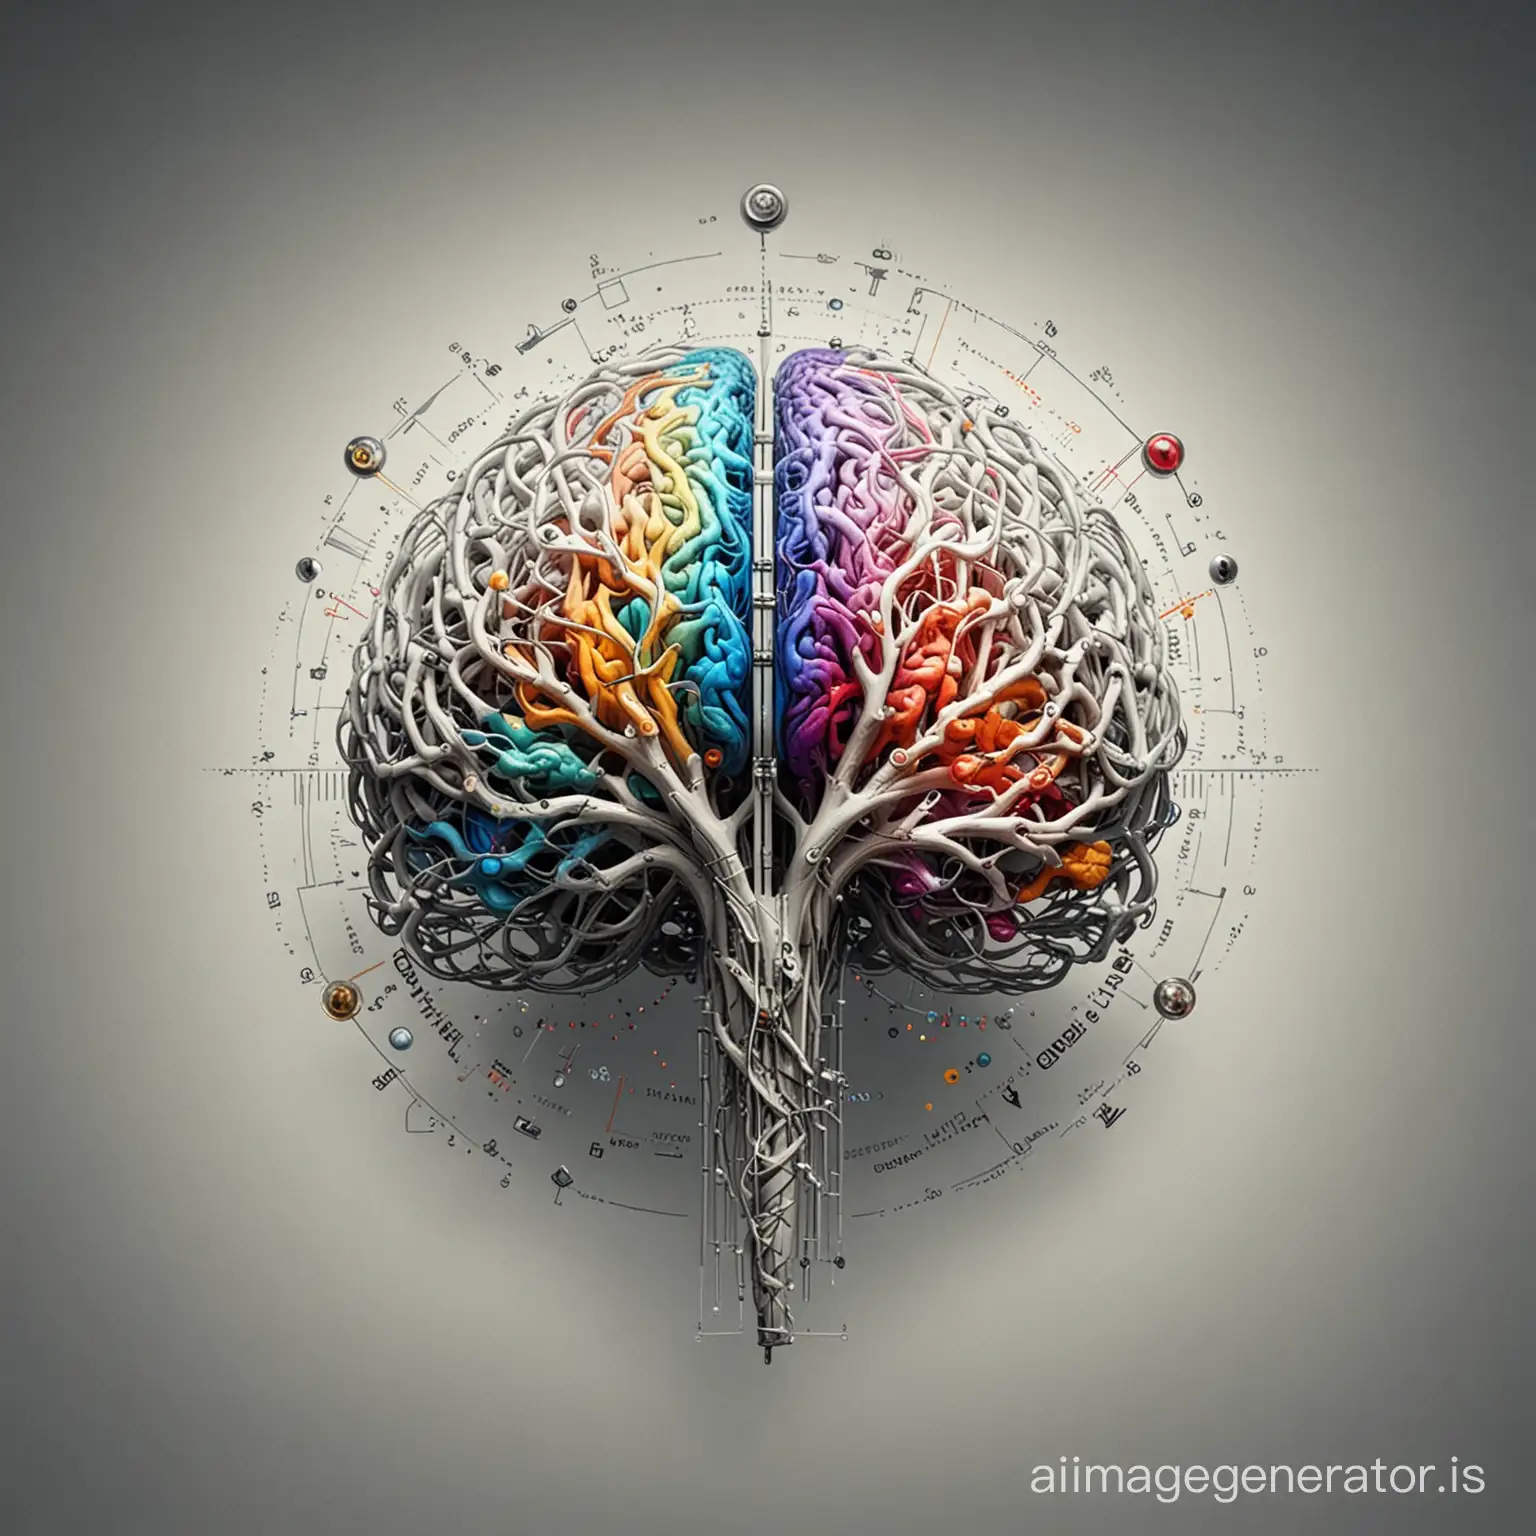 dalle:{
  "prompt": "Create an image depicting the logo for SynerGlide: a balanced scale symbolizing the harmonious relationship between human intellect and artificial intelligence. One side of the scale shows the organic contours of a human brain, symbolizing creativity and emotional depth. The opposite side features the precise geometry of an AI brain, representing computational efficiency and logic. This visual metaphor, illustrating the concept of 'Synergy', is grounded by the word 'Synergy' written below, signifying the fusion of human ingenuity with technological prowess. The design is futuristic, encapsulating a commitment to enhancing human capabilities through technology.",
  "size": "1024x1024"
}